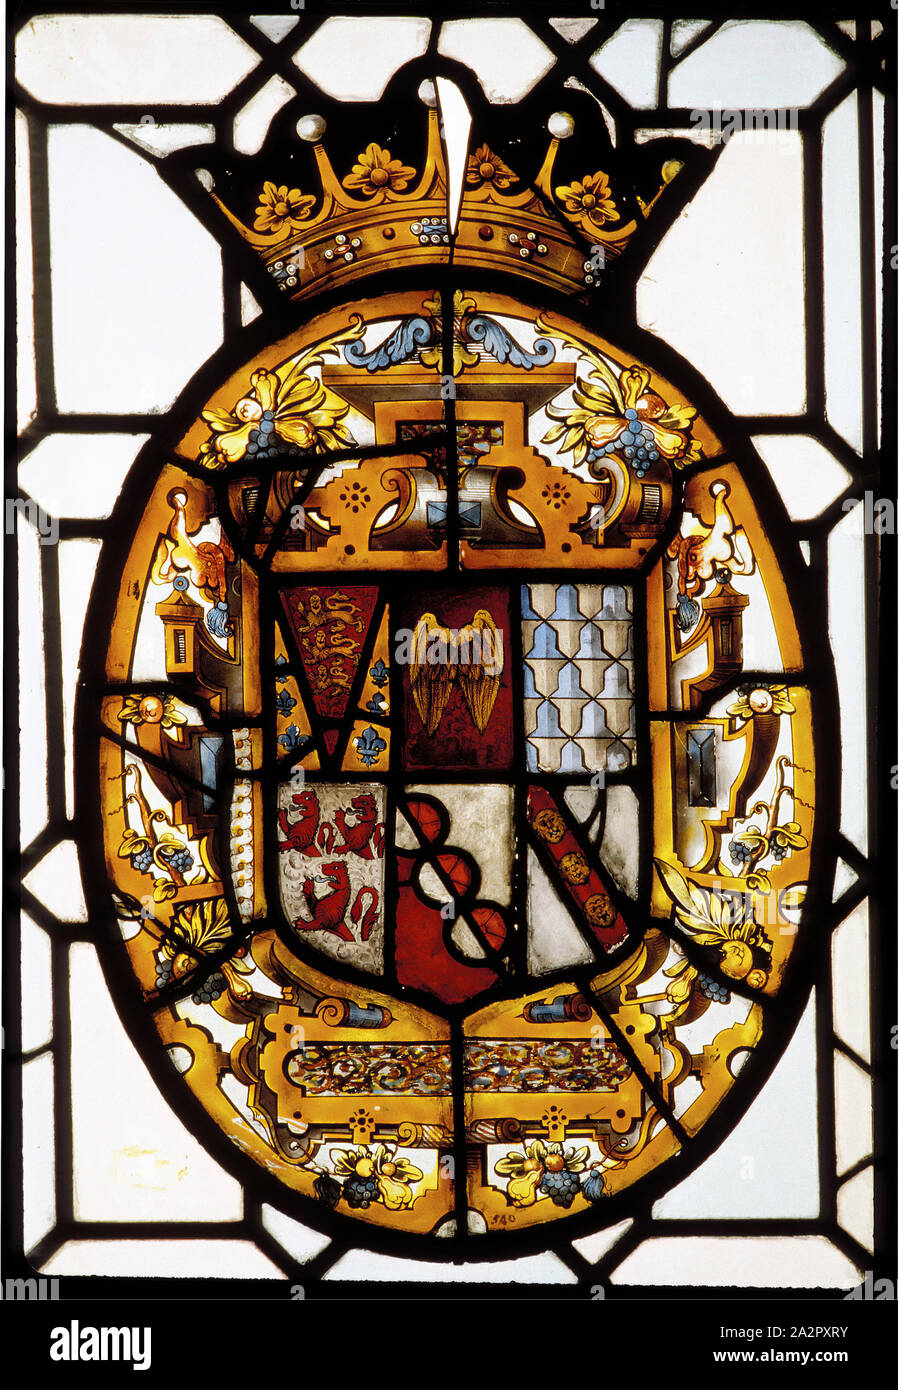 Unknown (English), Coat of Arms of Sir Edward Seymour, Earl of Hertford, Duke of Somerset, late 16th Century, Stained glass: Flashed glass; white glass with silver stain and enamel, 26 3/8 x 16 5/8 in. (67.0 x 42.2 cm Stock Photo